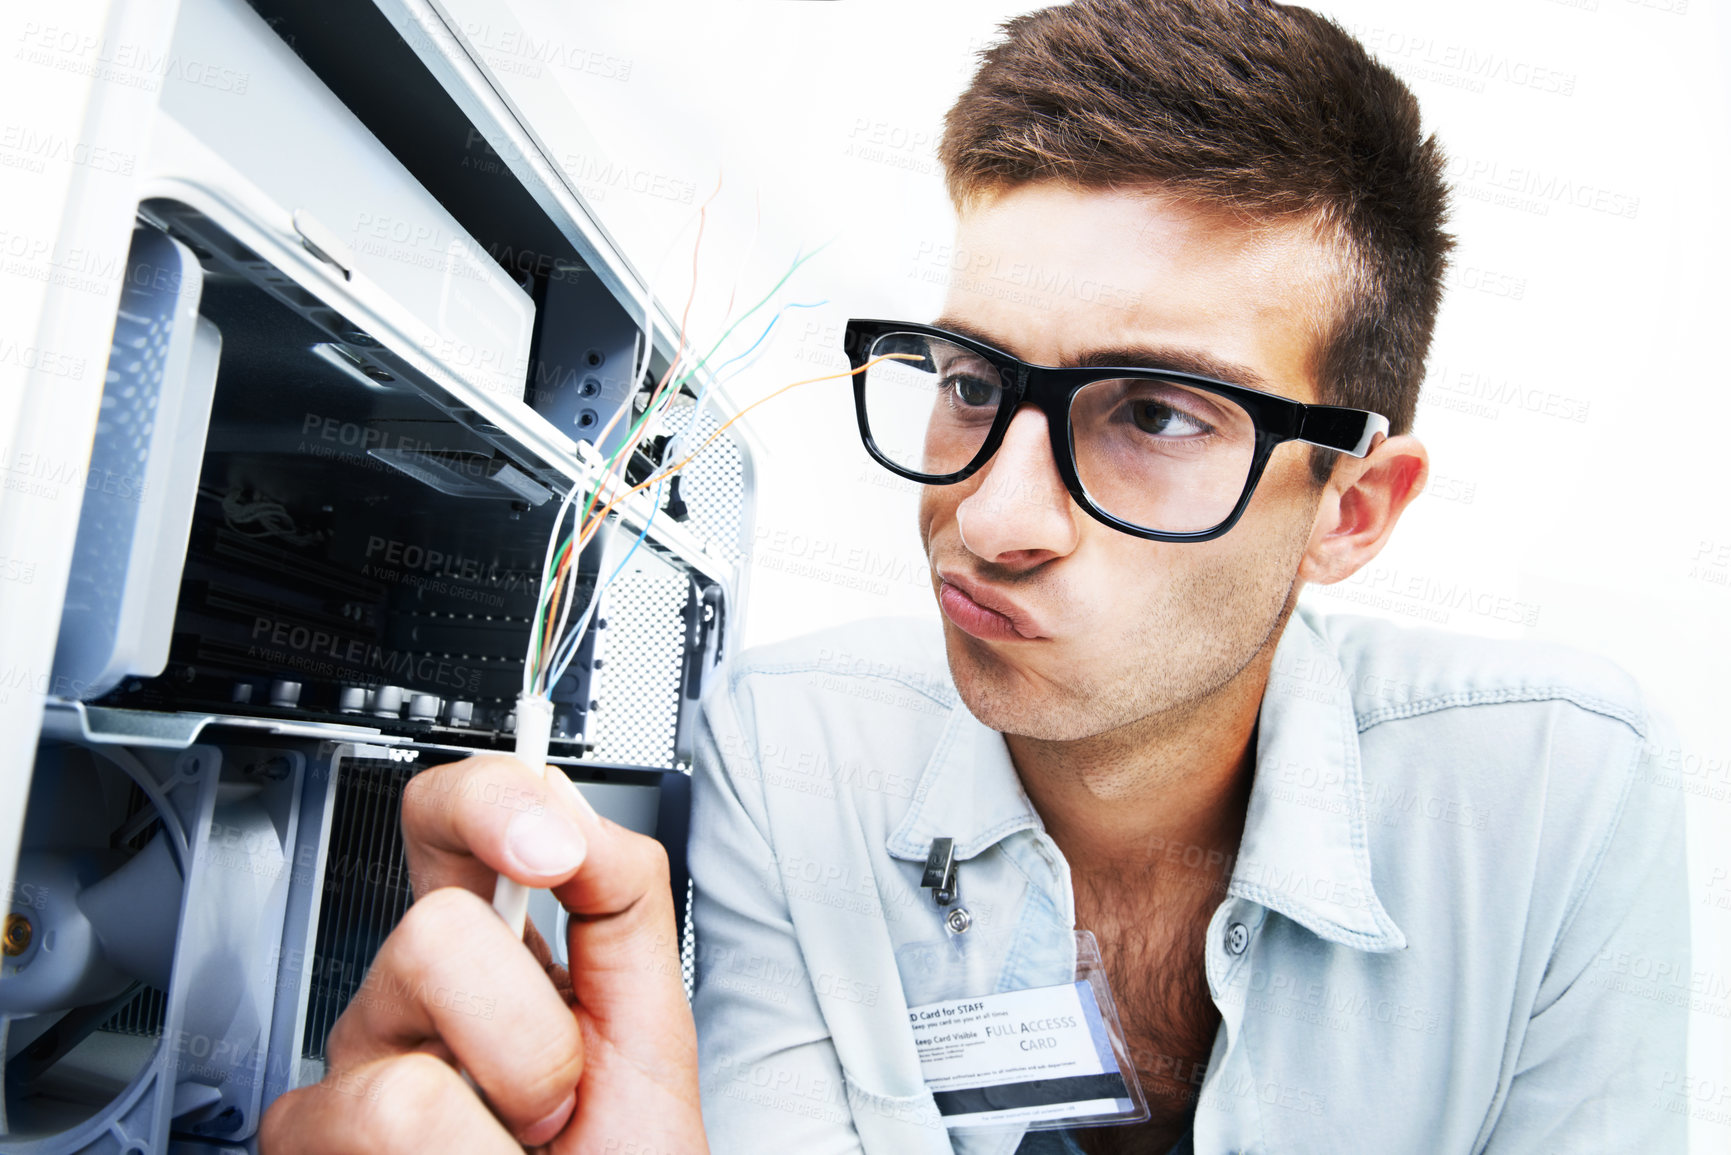 Buy stock photo Computer tower, wires and man repair studio hardware, electronics or check machine crisis, fail or disaster. System maintenance, service industry or IT specialist problem solving on white background
